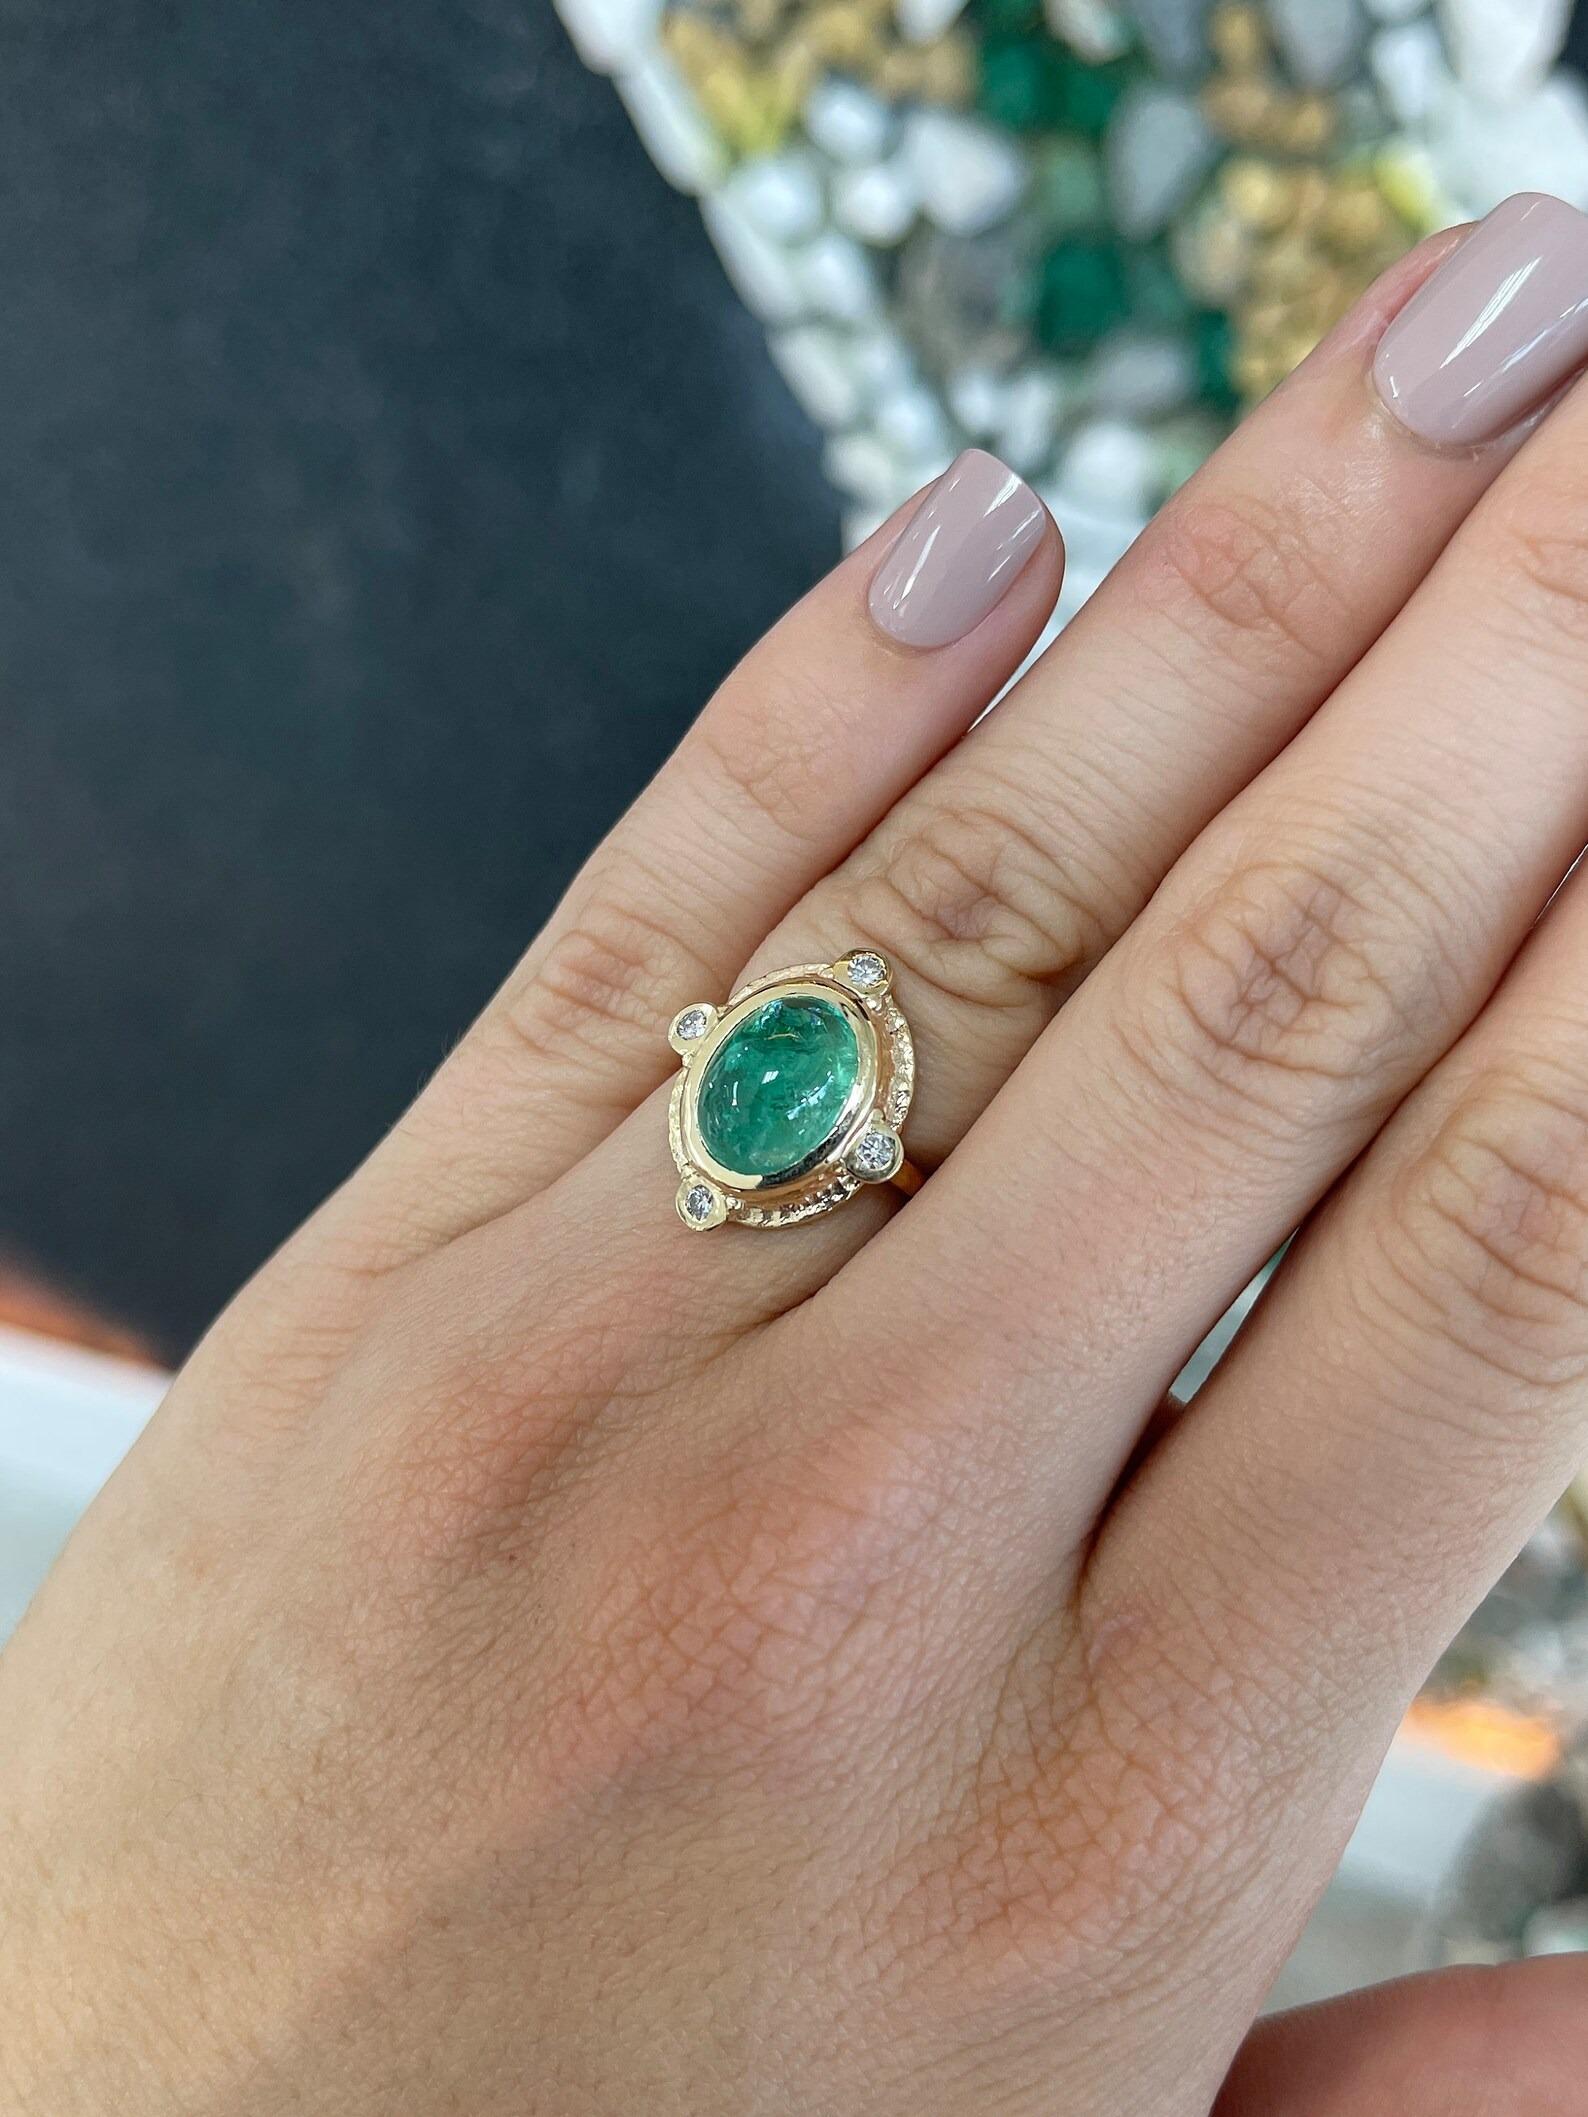 Oval Cut 5.45tcw Rare Oval Cabochon Cut Emerald & Diamond Accent Vintage Styled Ring 14K For Sale